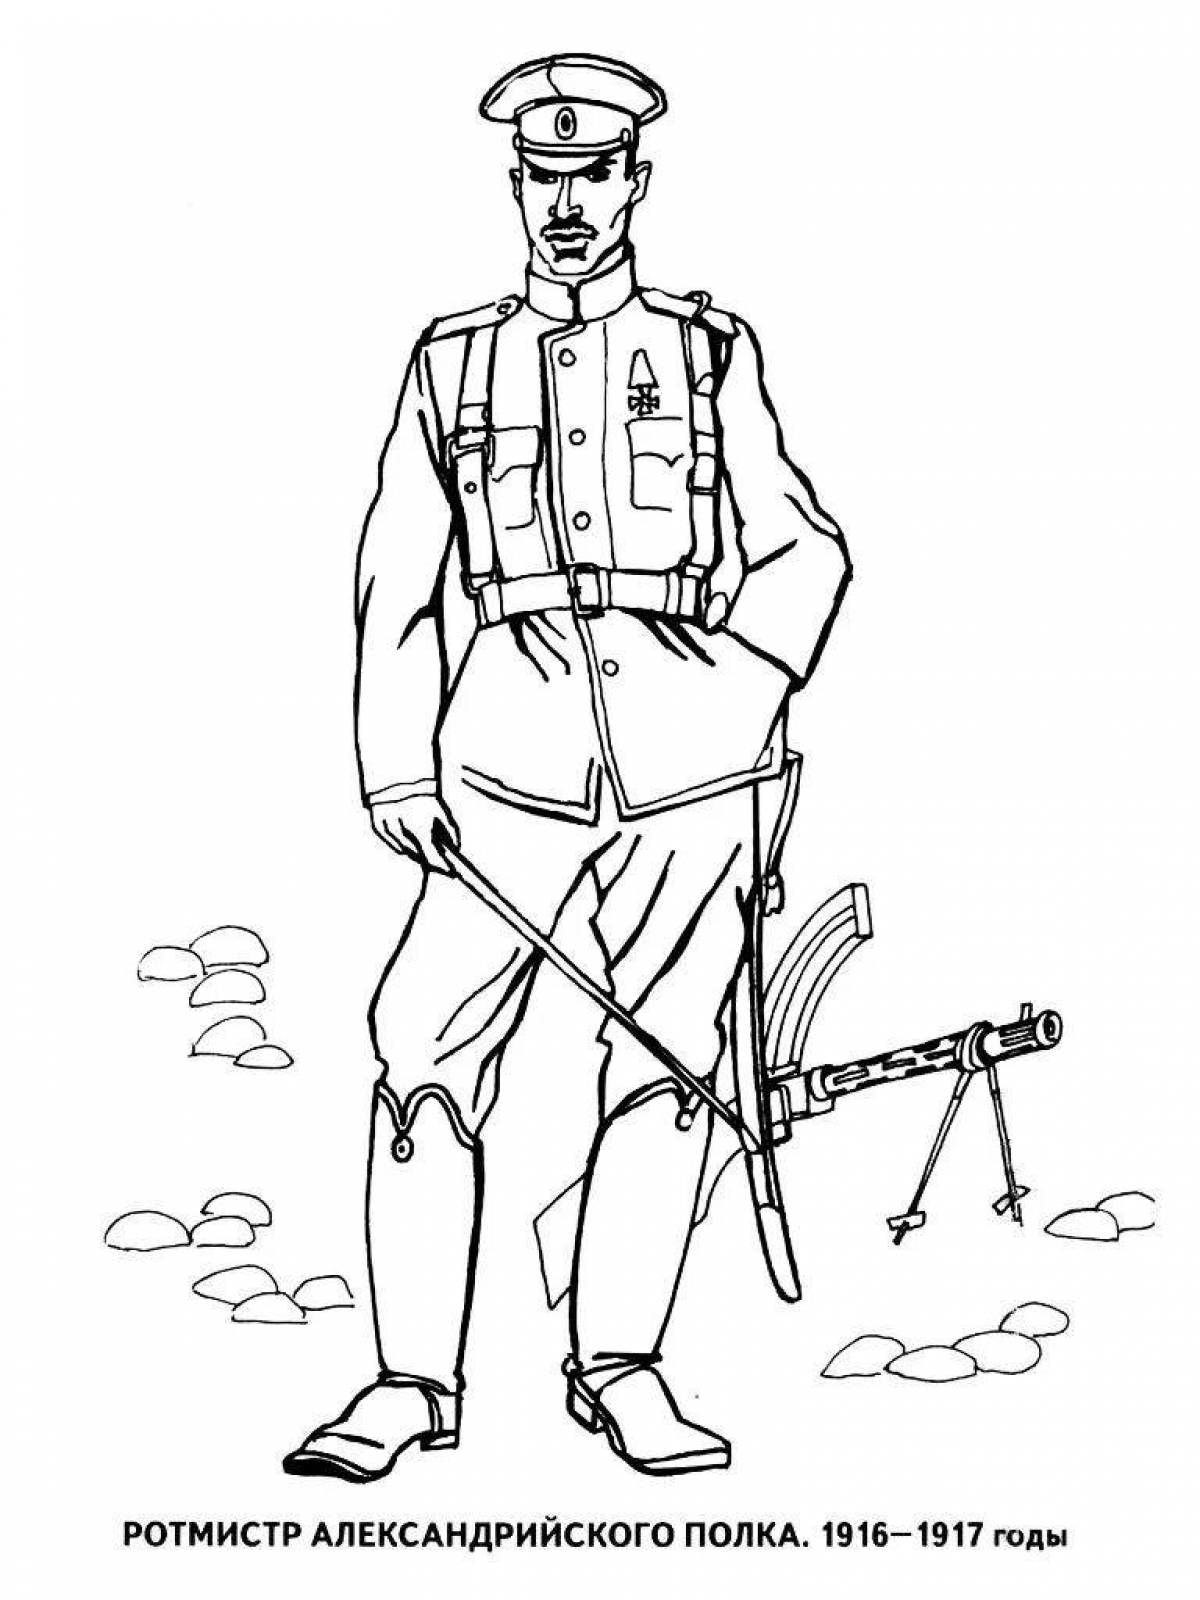 Colorful Soviet soldier coloring page